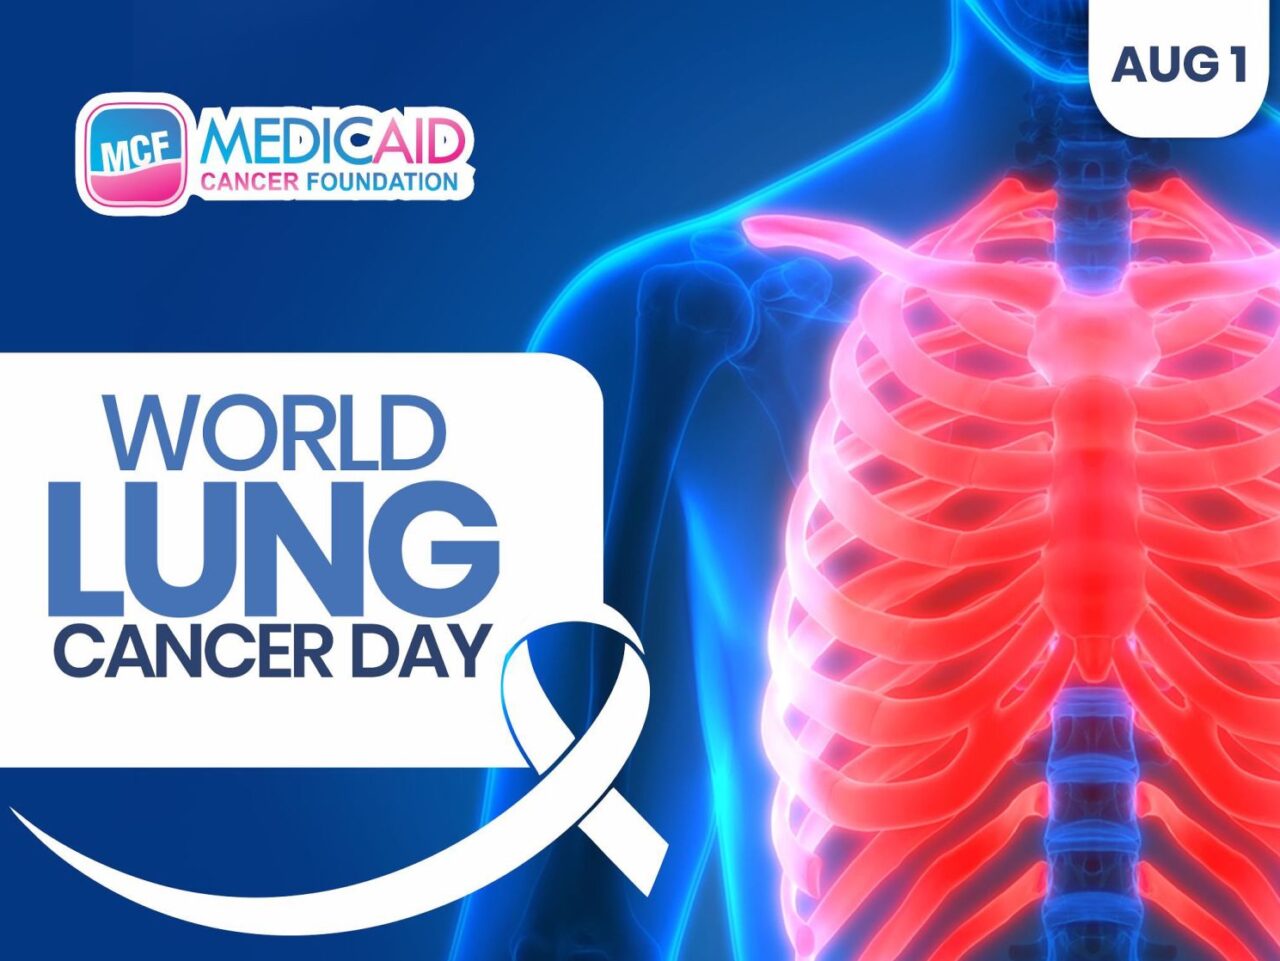 Join us as we mark World Lung Cancer Day – Medicaid Cancer Foundation